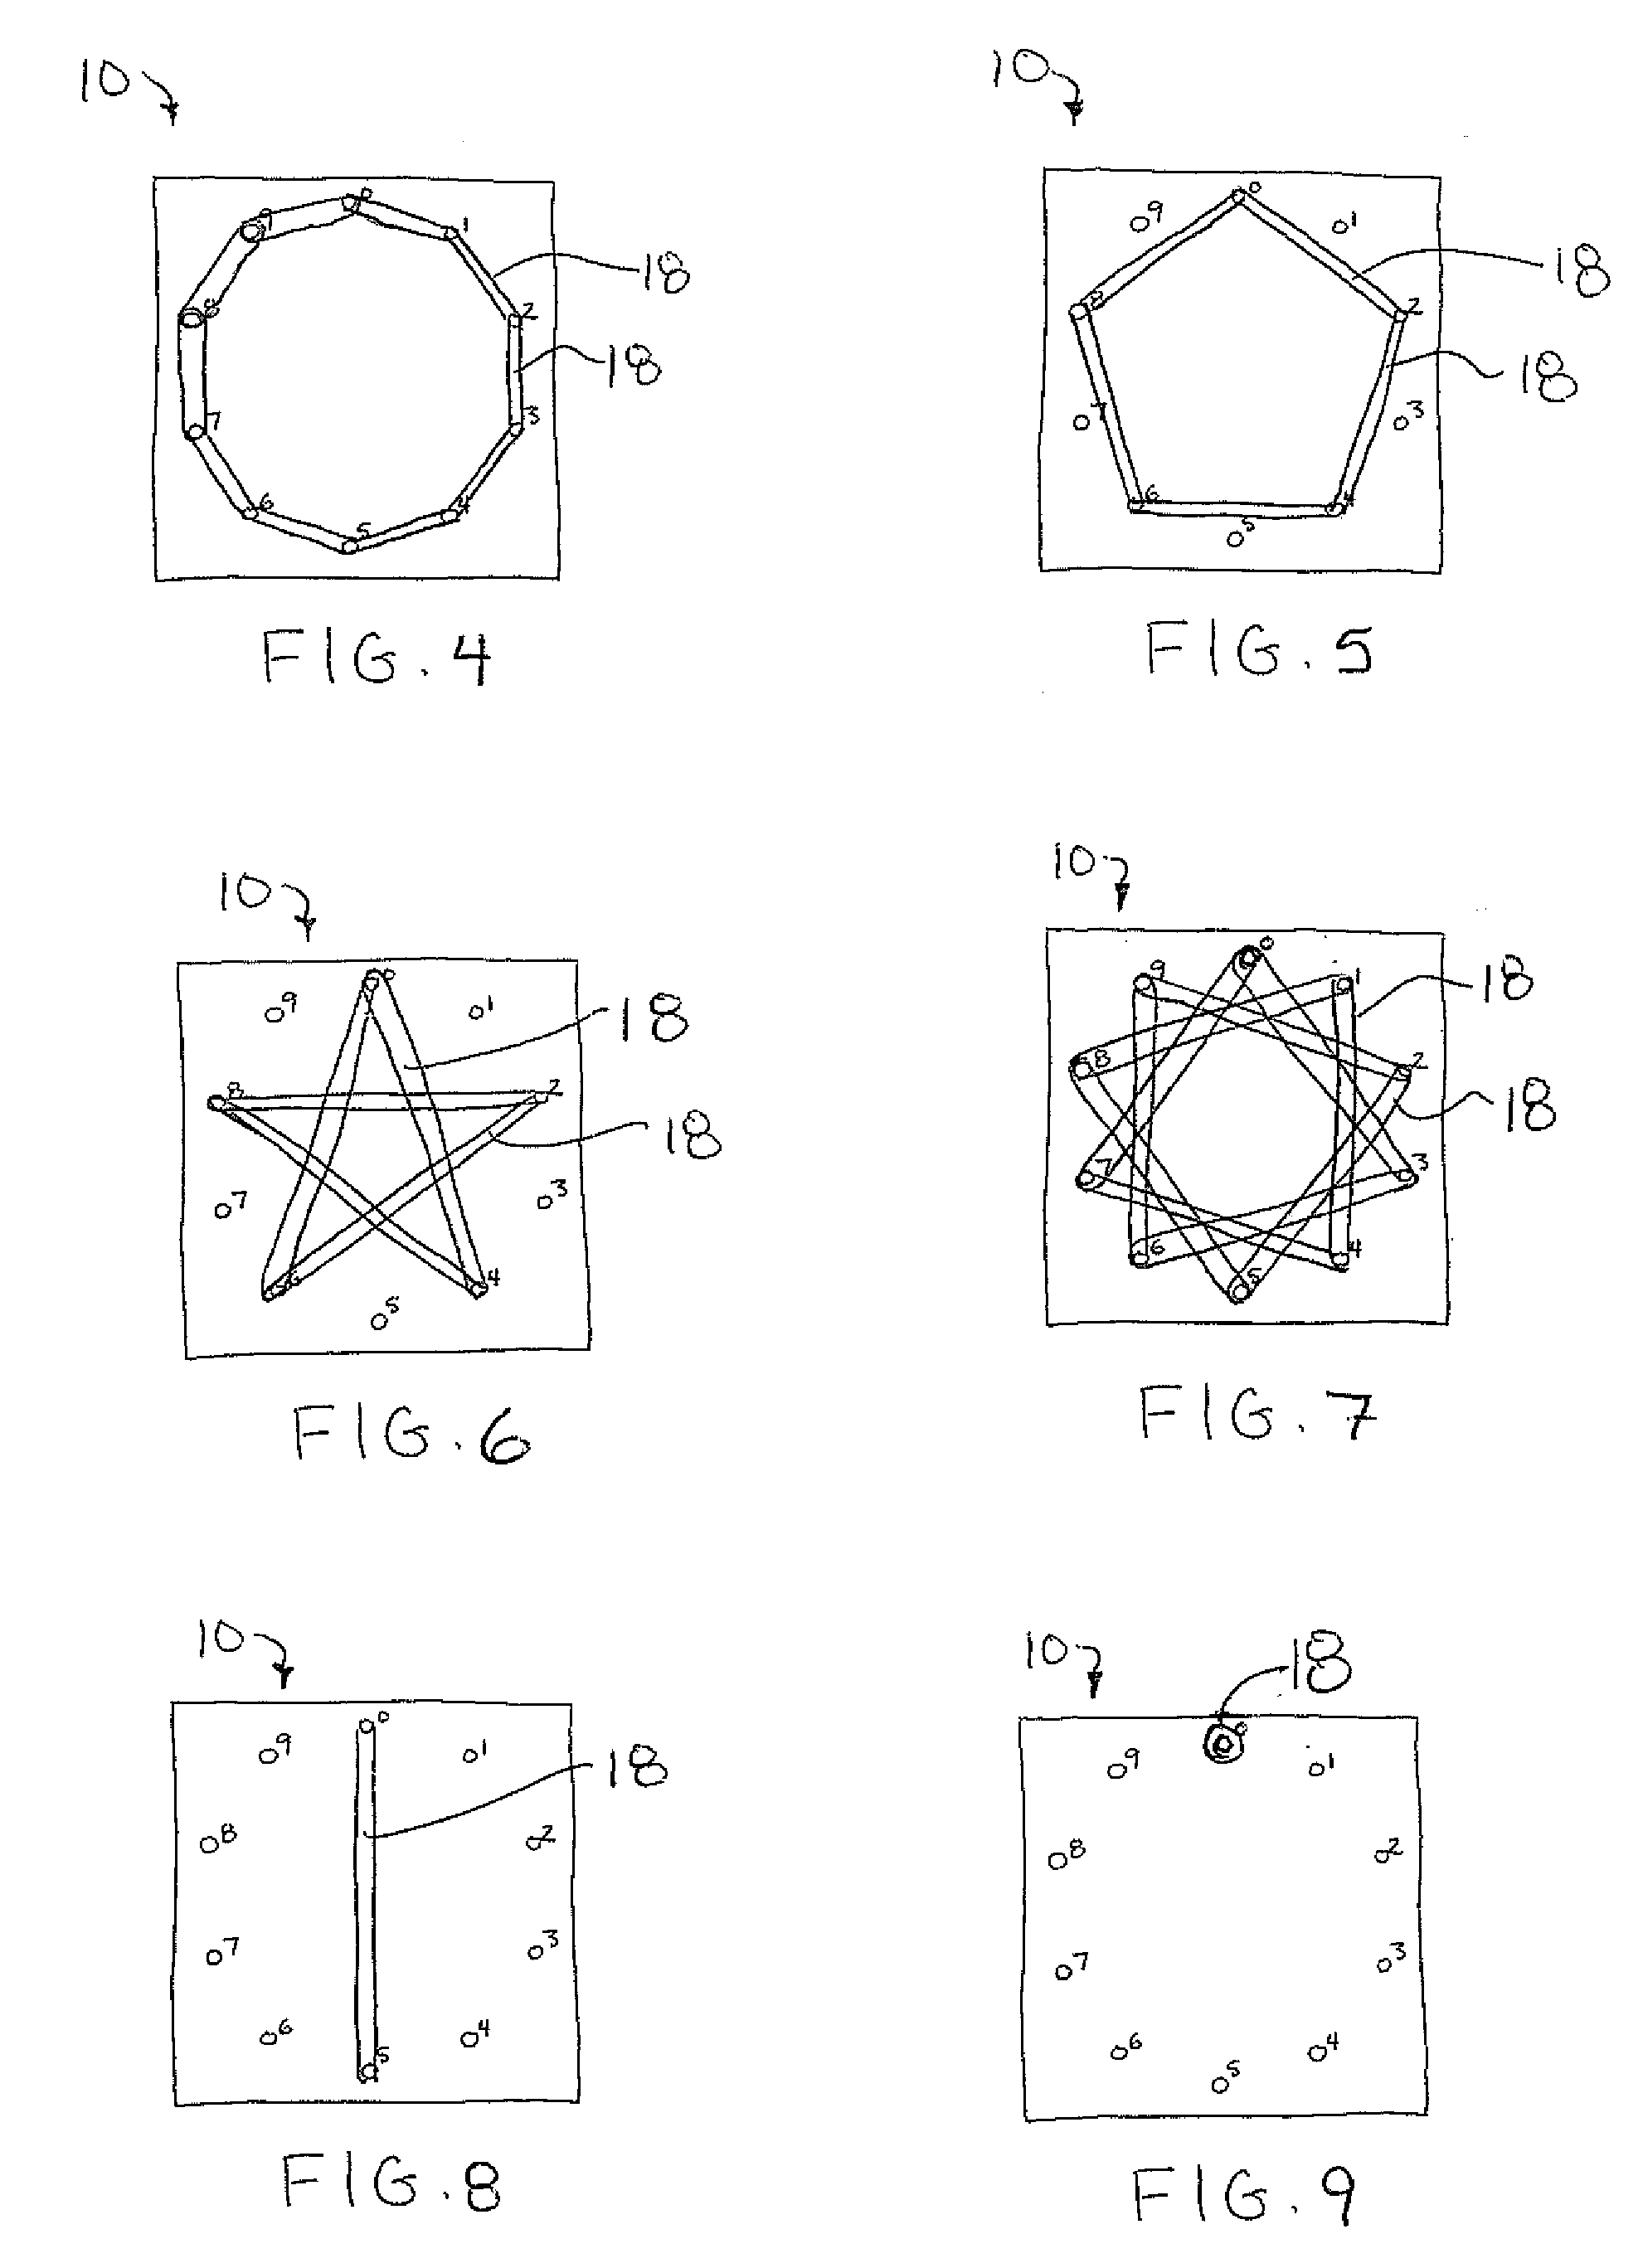 Educational Device and Method of Use